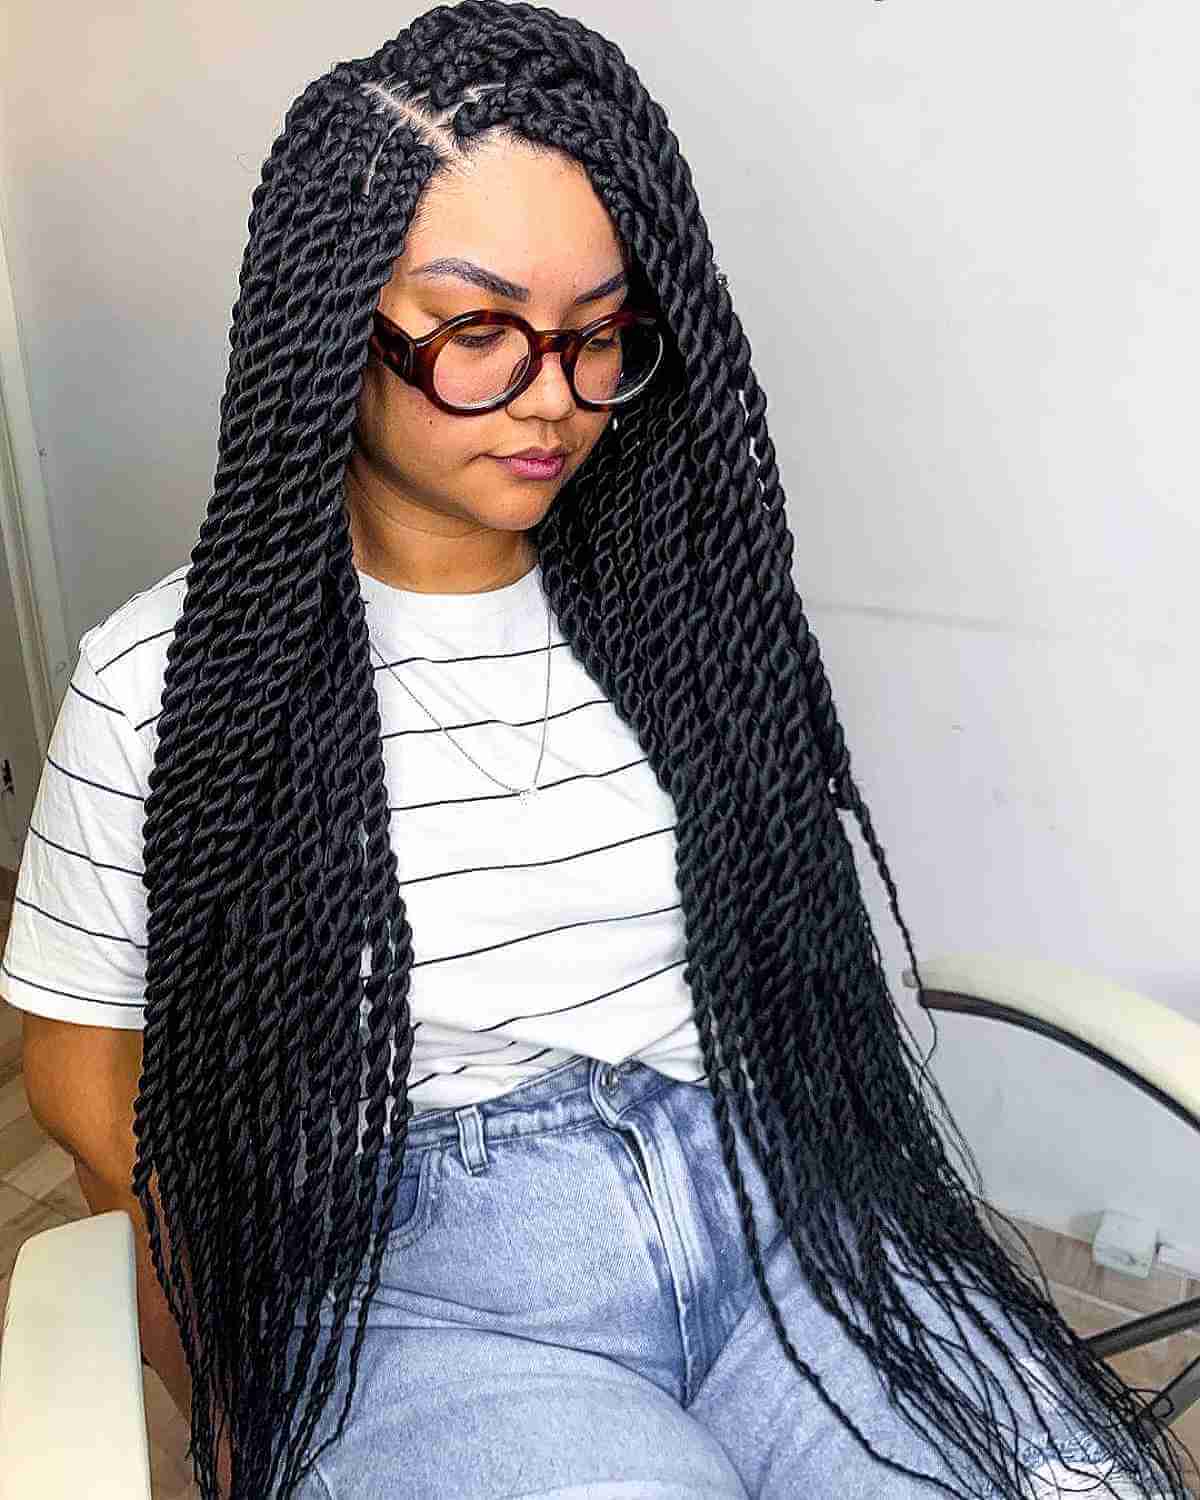 49 Senegalese Twist Hairstyles for Black Women - StayGlam